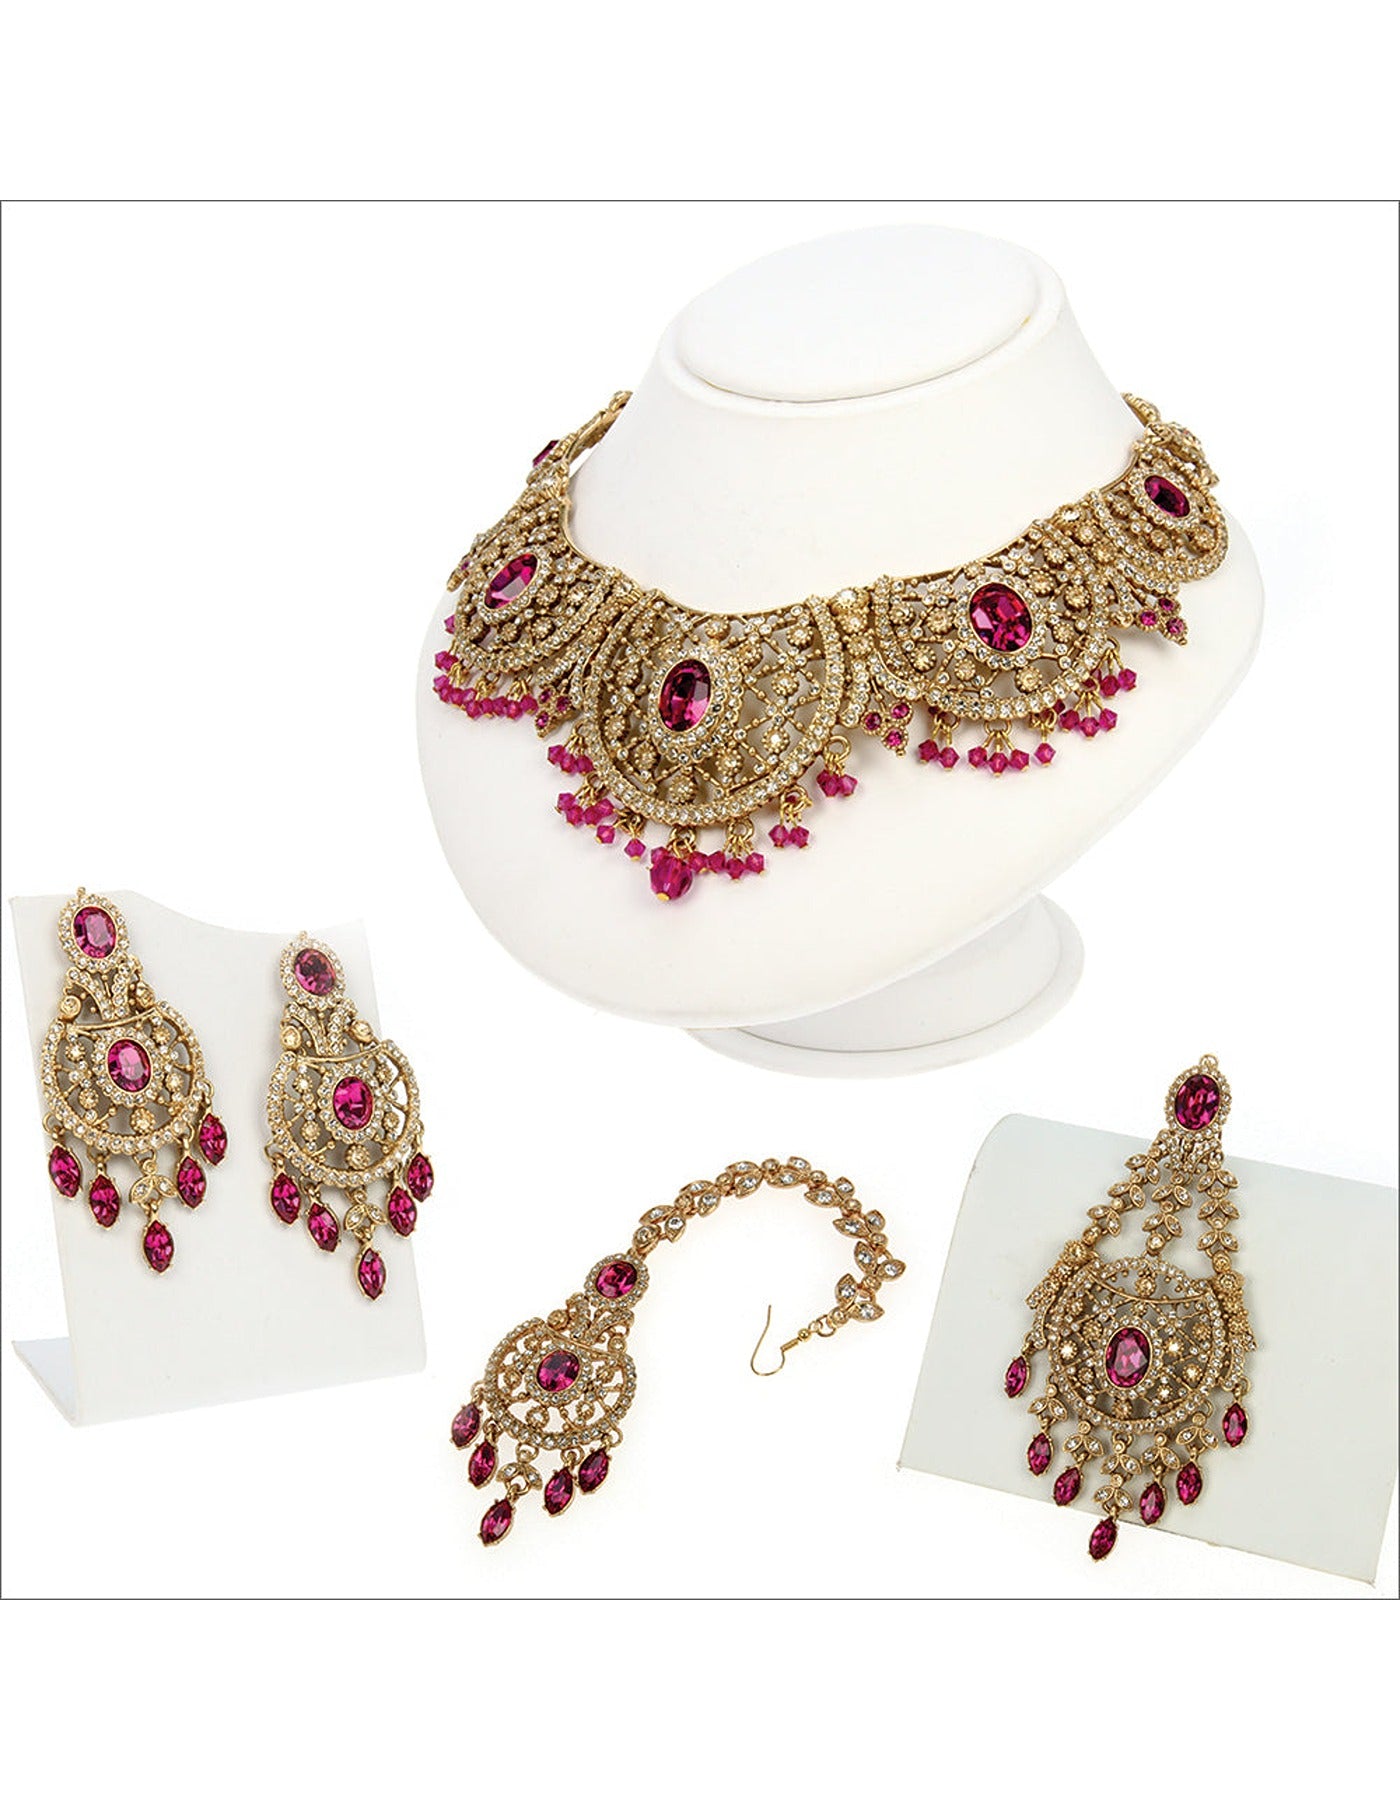 Antique Gold Jewelry with Fuchsia and Crystal Golden Shadow Accents